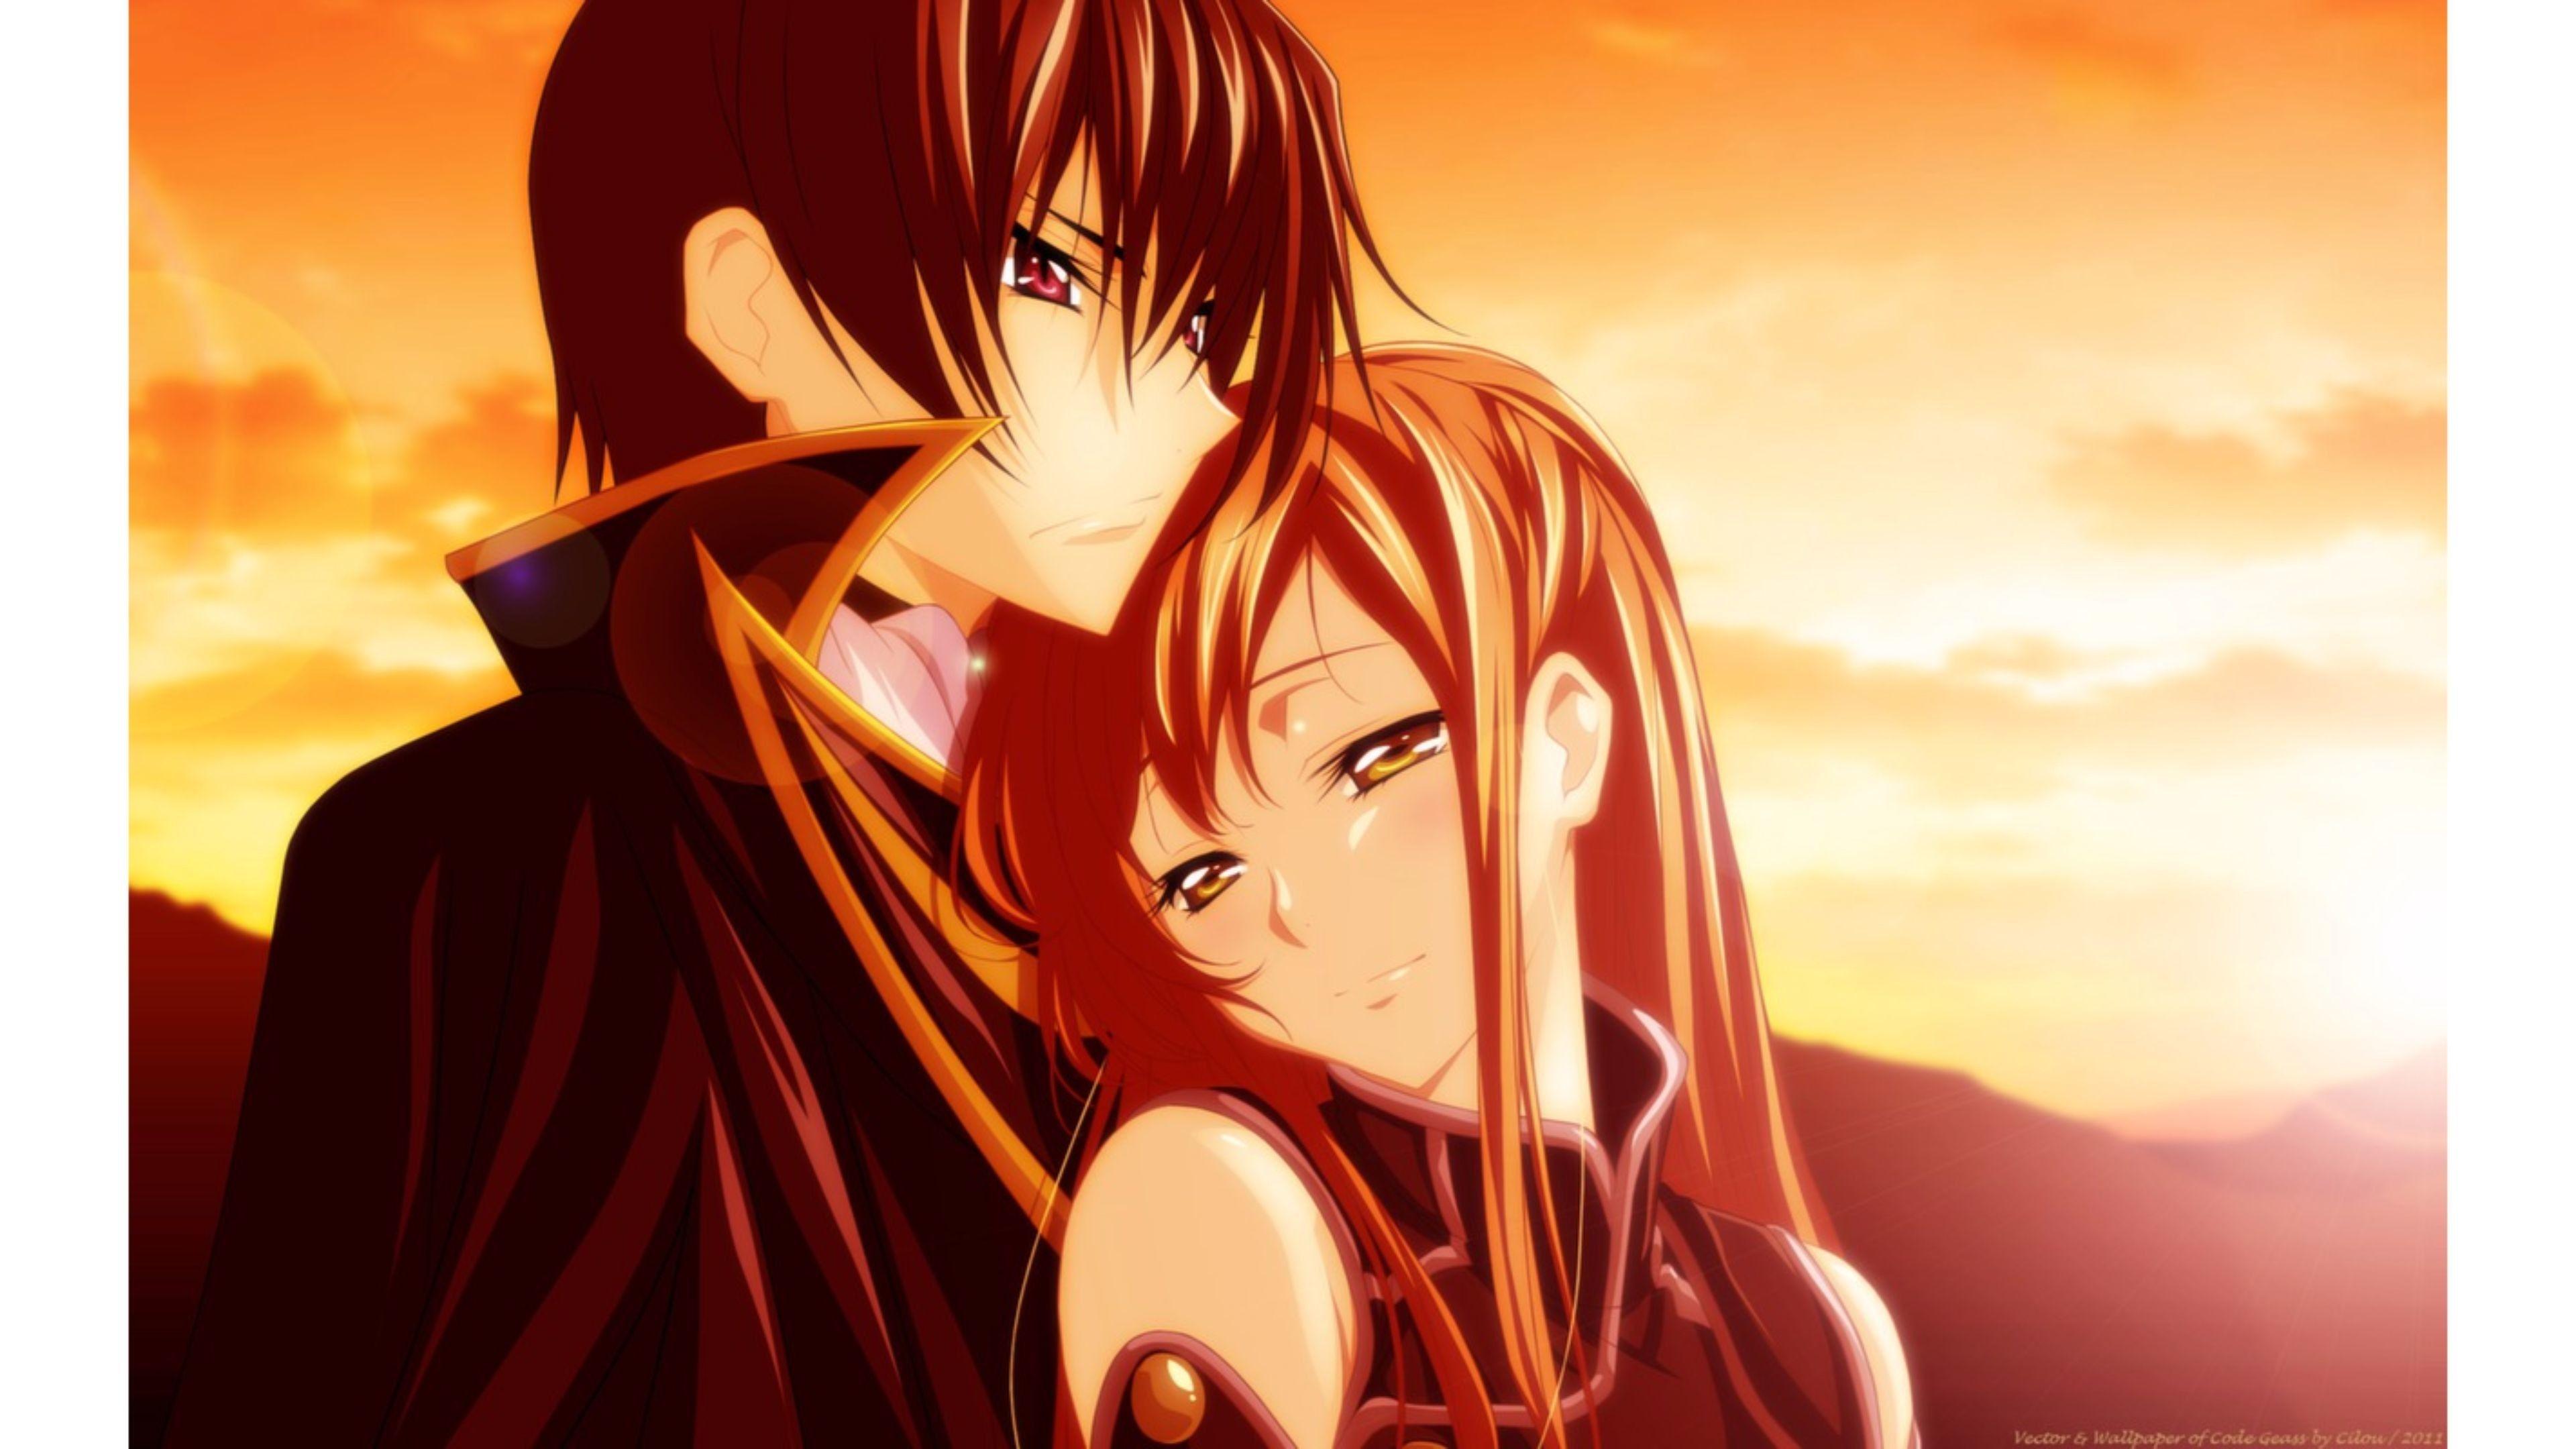 Anime Love Wallpapers - Top Free Anime Love Backgrounds - Wallpaperaccess